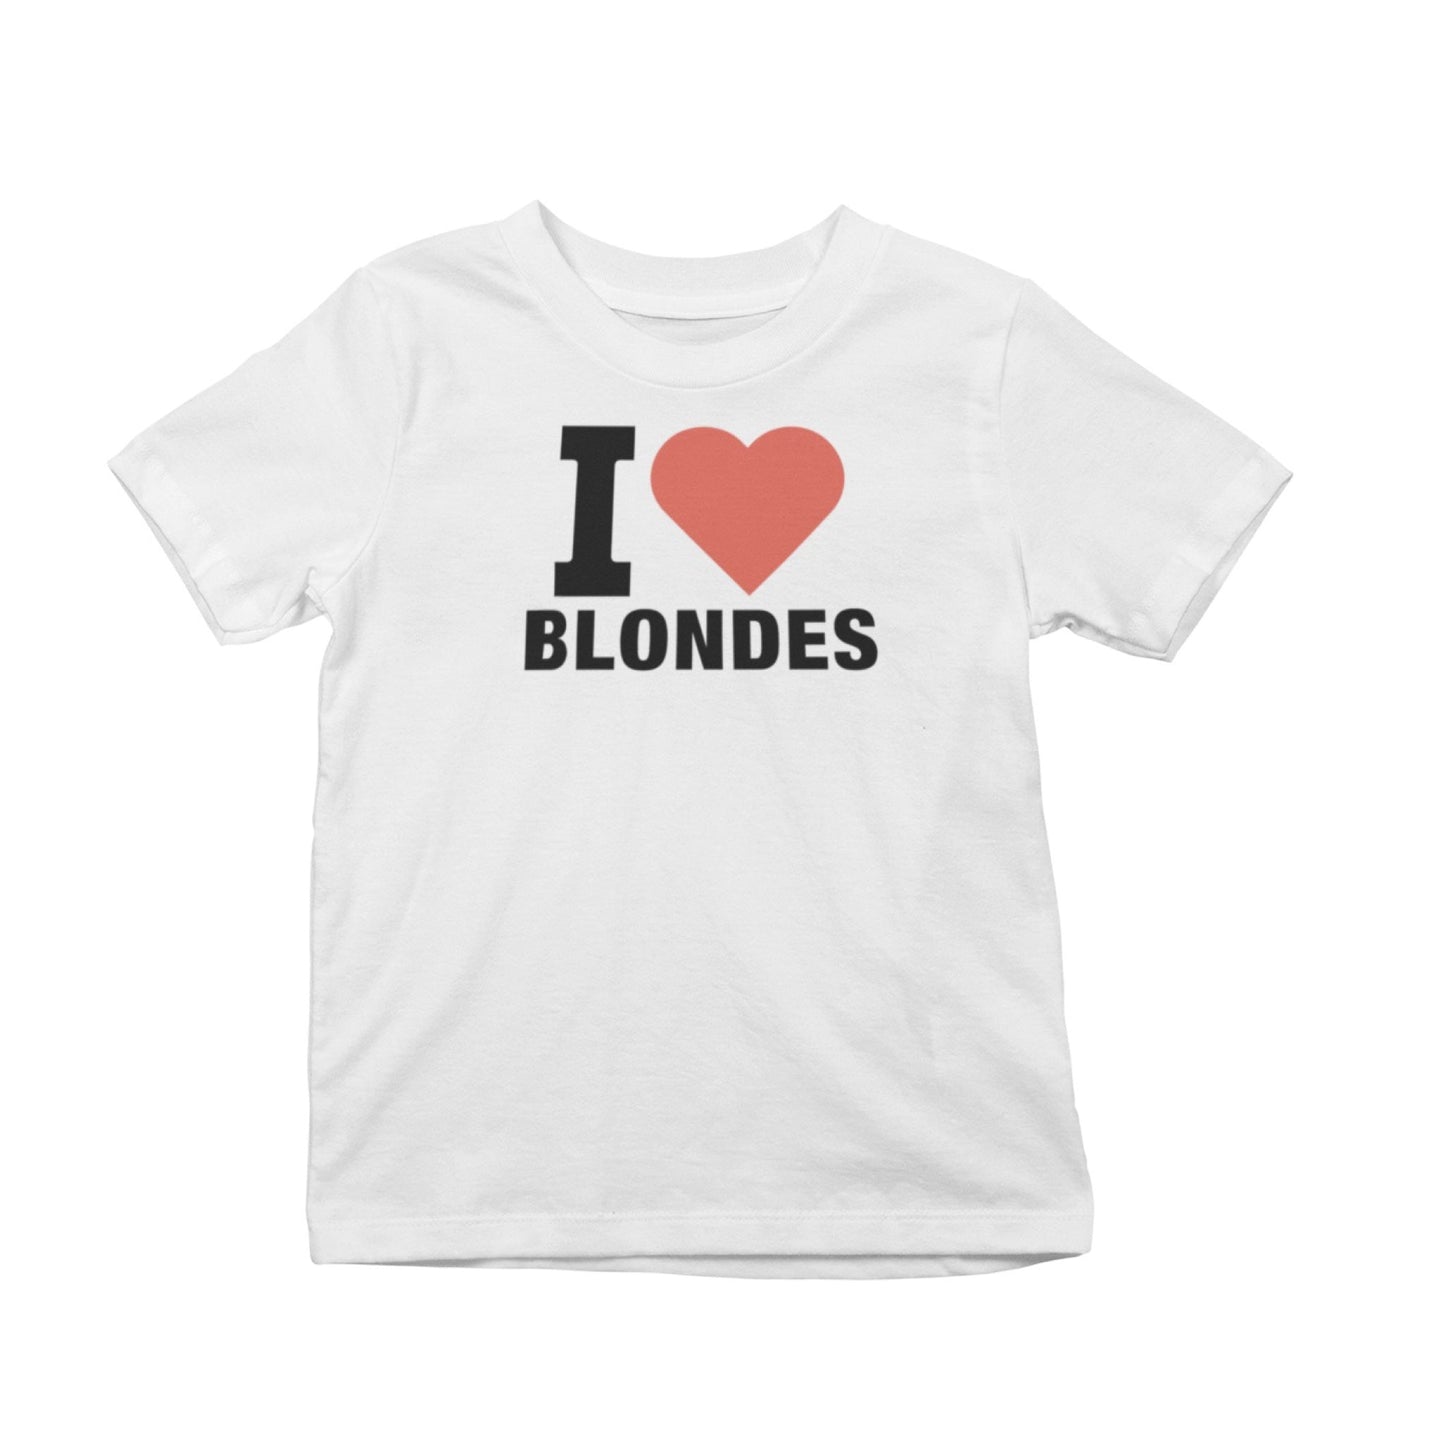 I Heart Blondes Tee